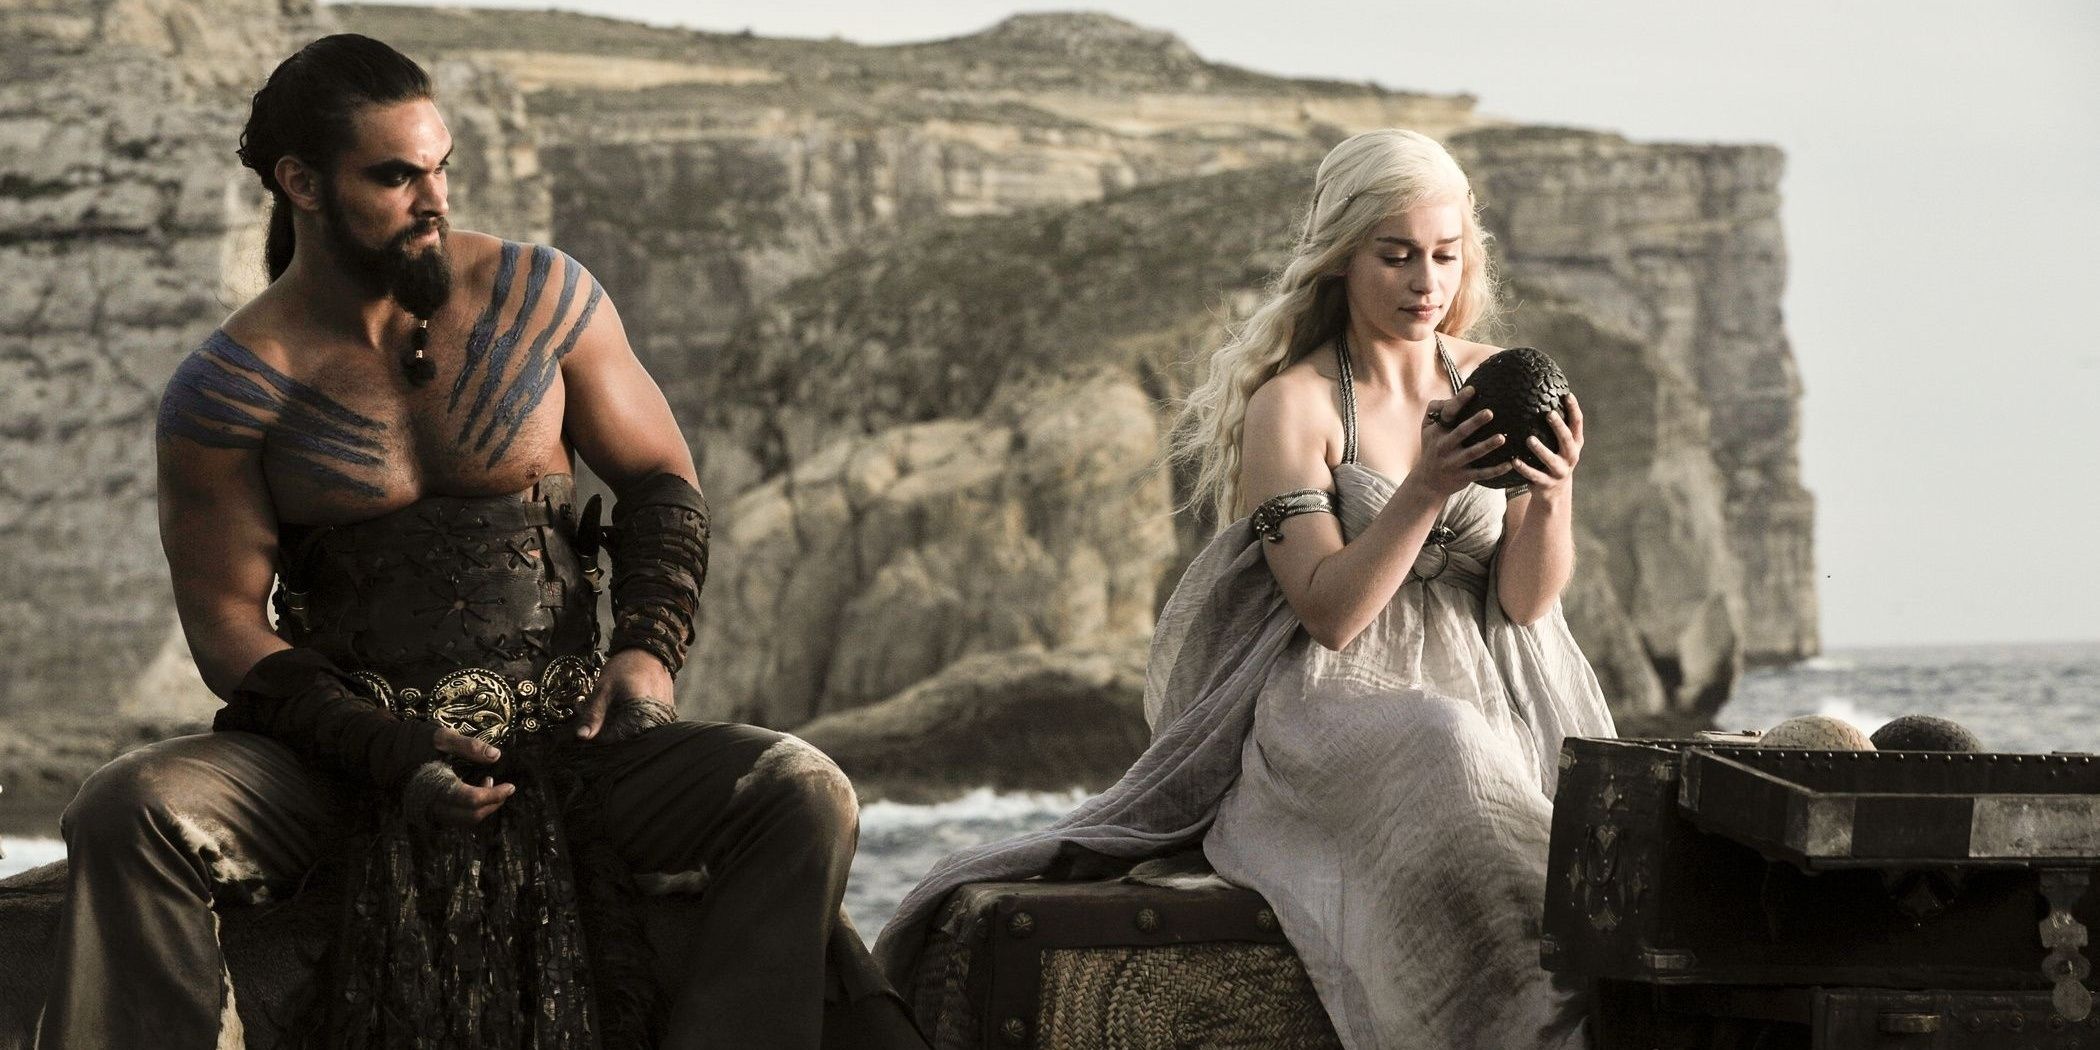 Khal Drogo with Daenerys Targaryen sitting together as she looks at a dragon egg in Game of Thrones 